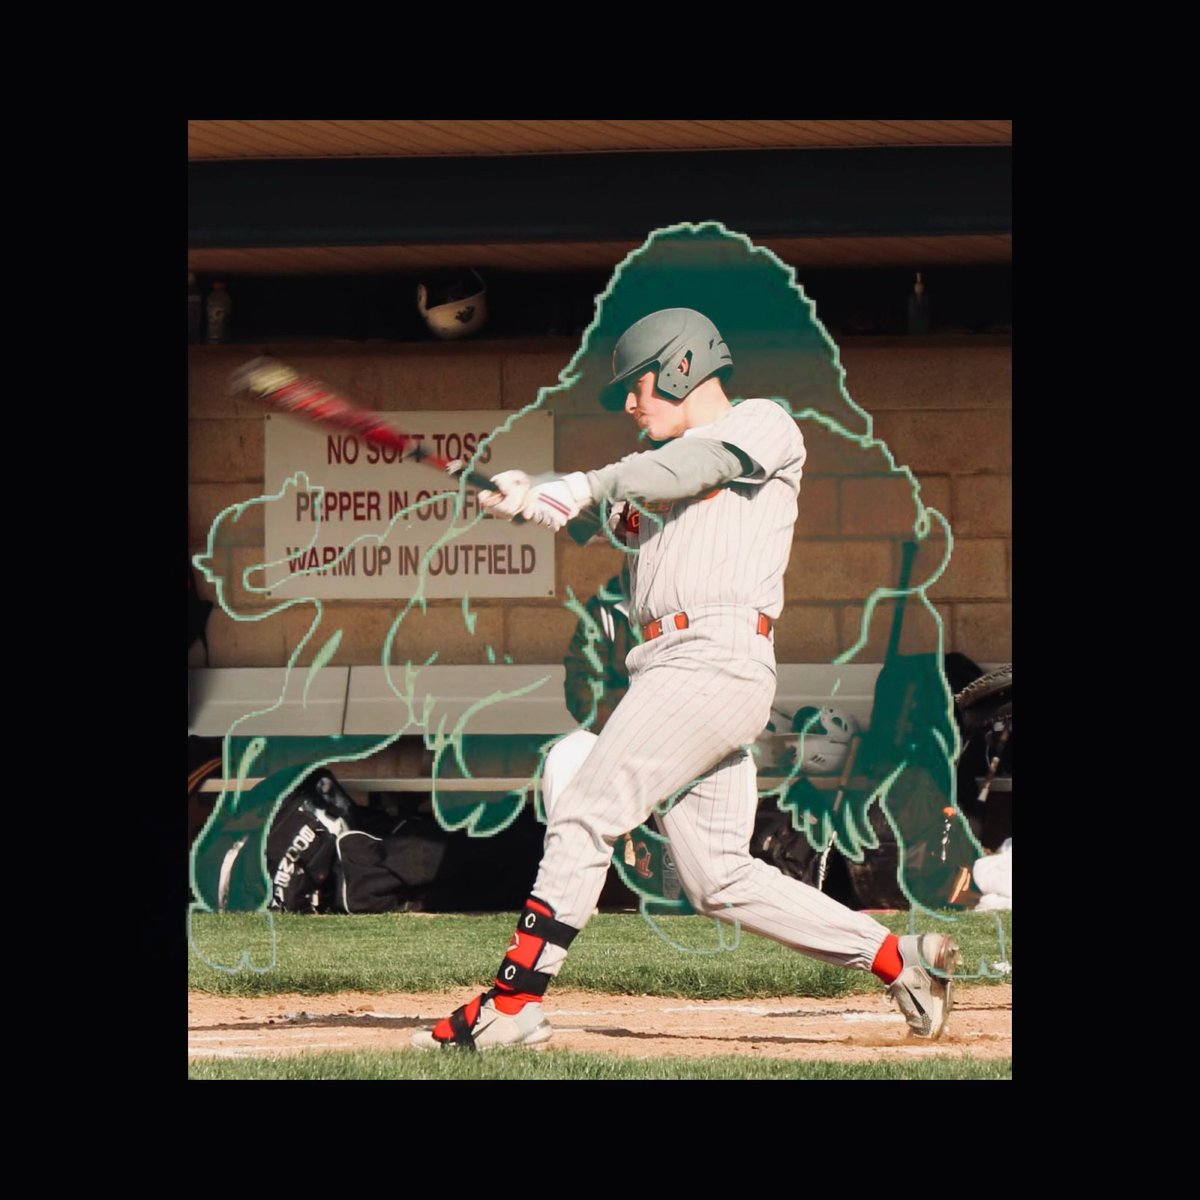 I am extremely excited to announce that I have decided to further my academic and athletic career at Bethany College. 💚🦬
#ONEBethany
@baseballwvbison
@jt_thomas36